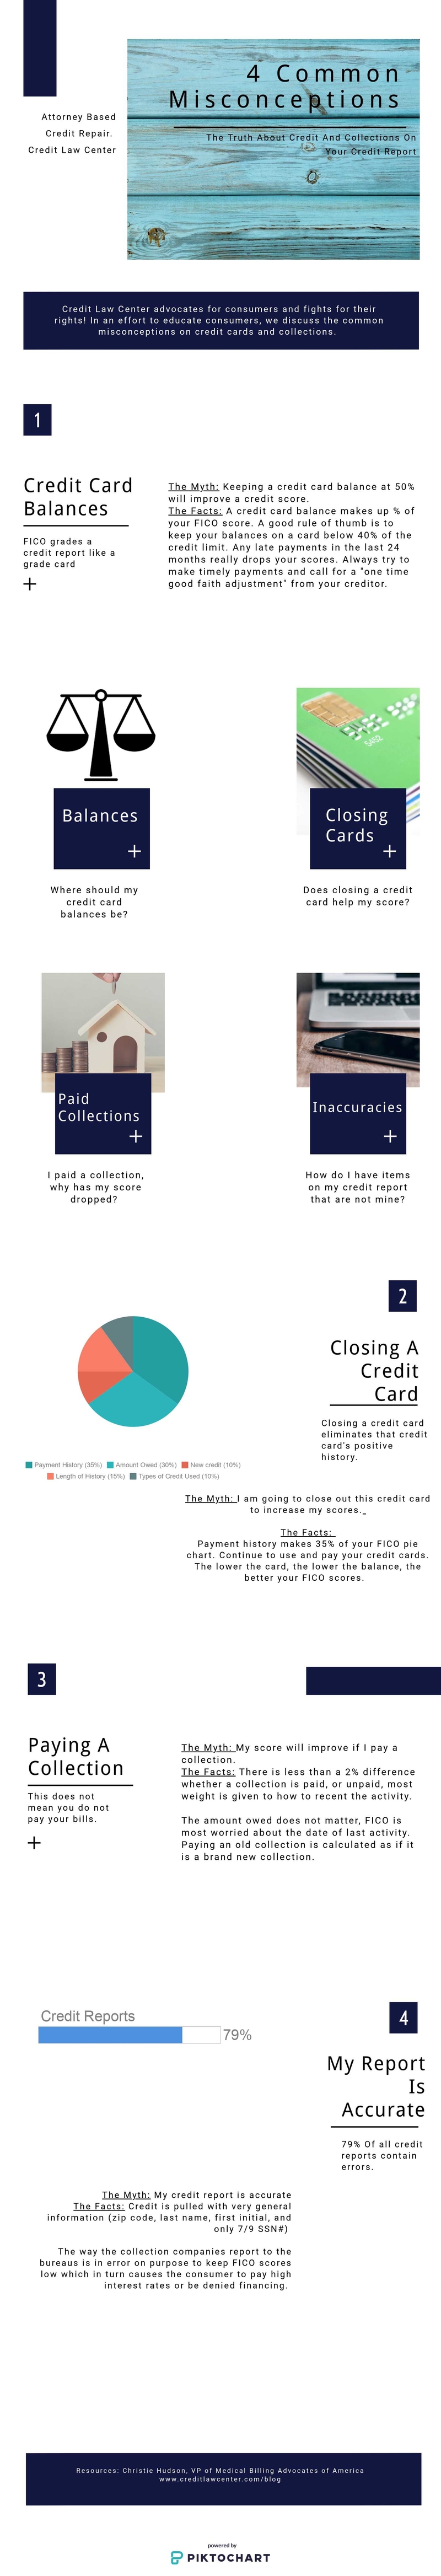 credit collection myths infographic